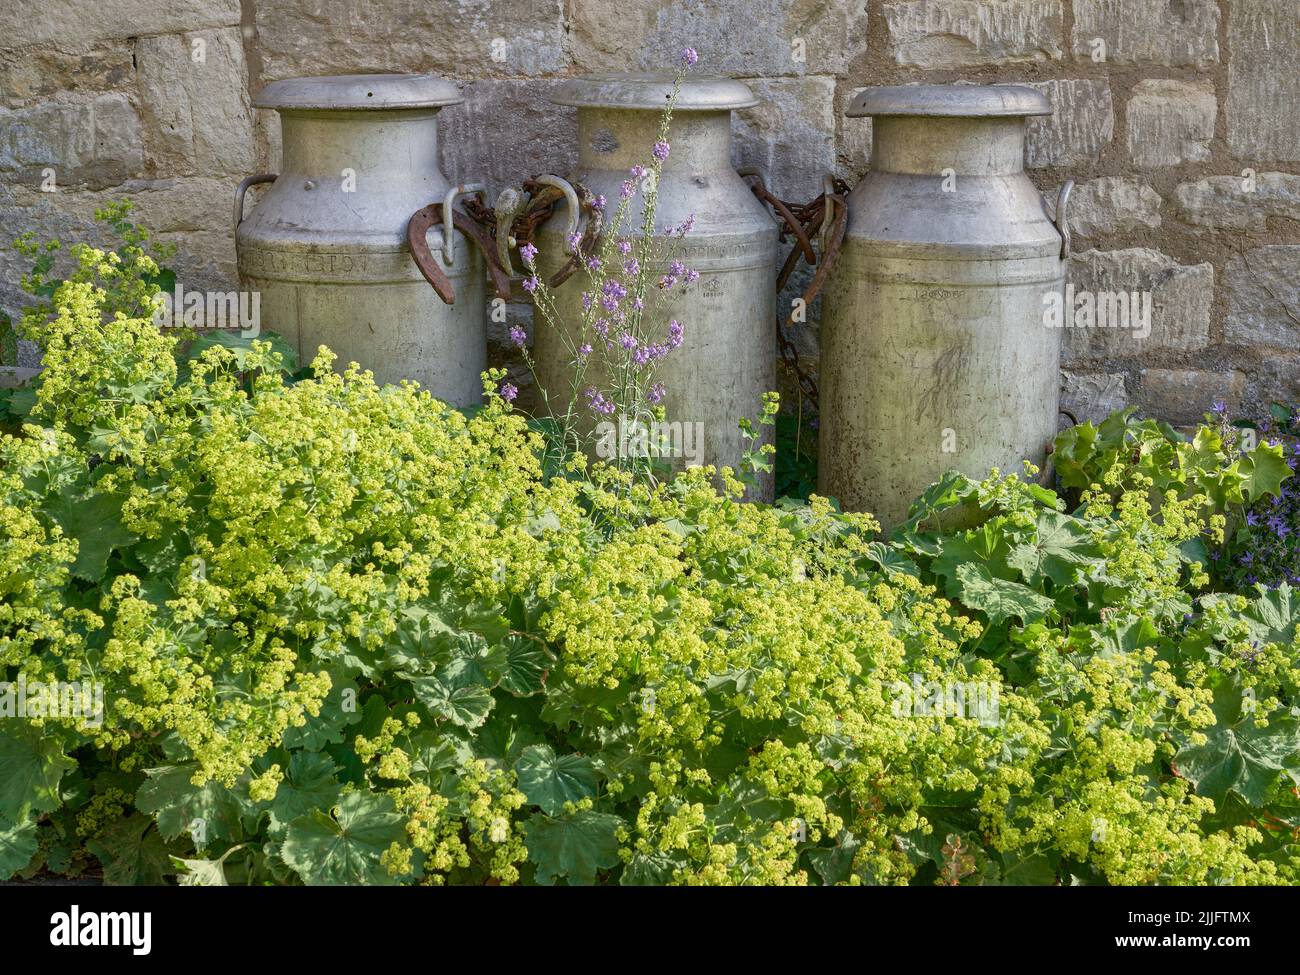 Traditional English Milk Churns agains a stone wall in a Cotswolds garden Stock Photo